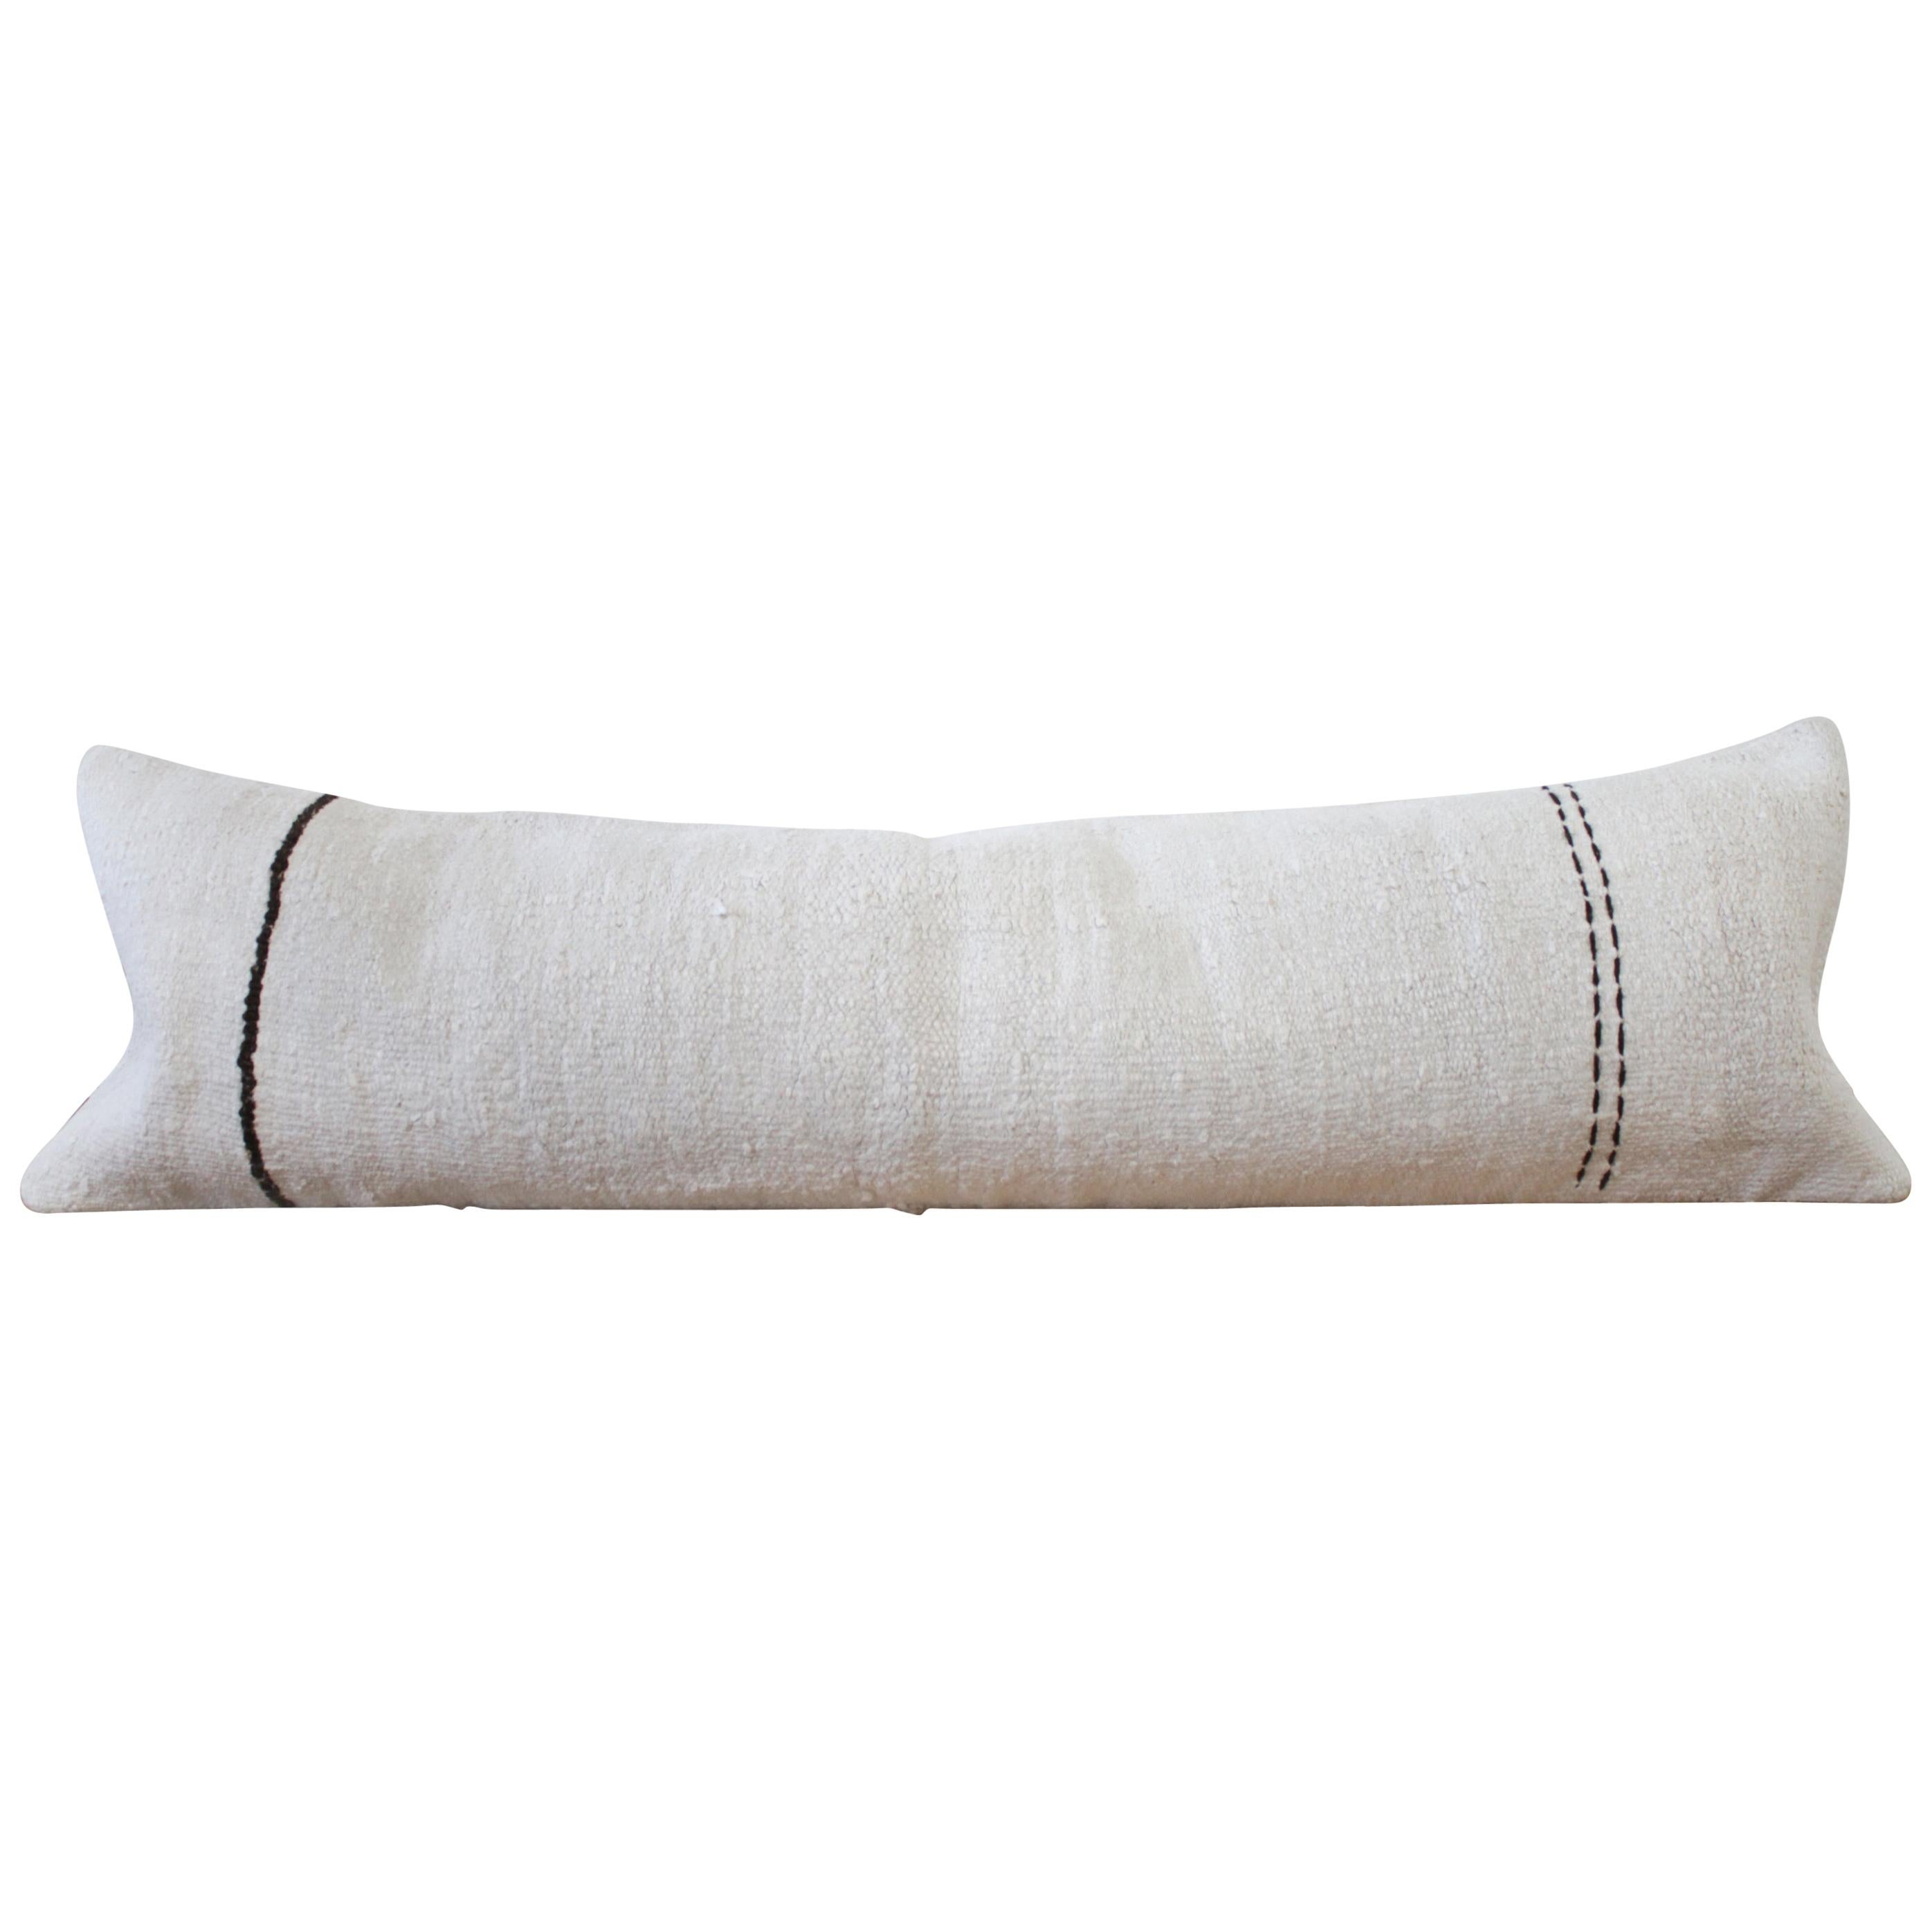 Vintage Turkish Hemp Rug Pillow in Off White with Stitched Pattern